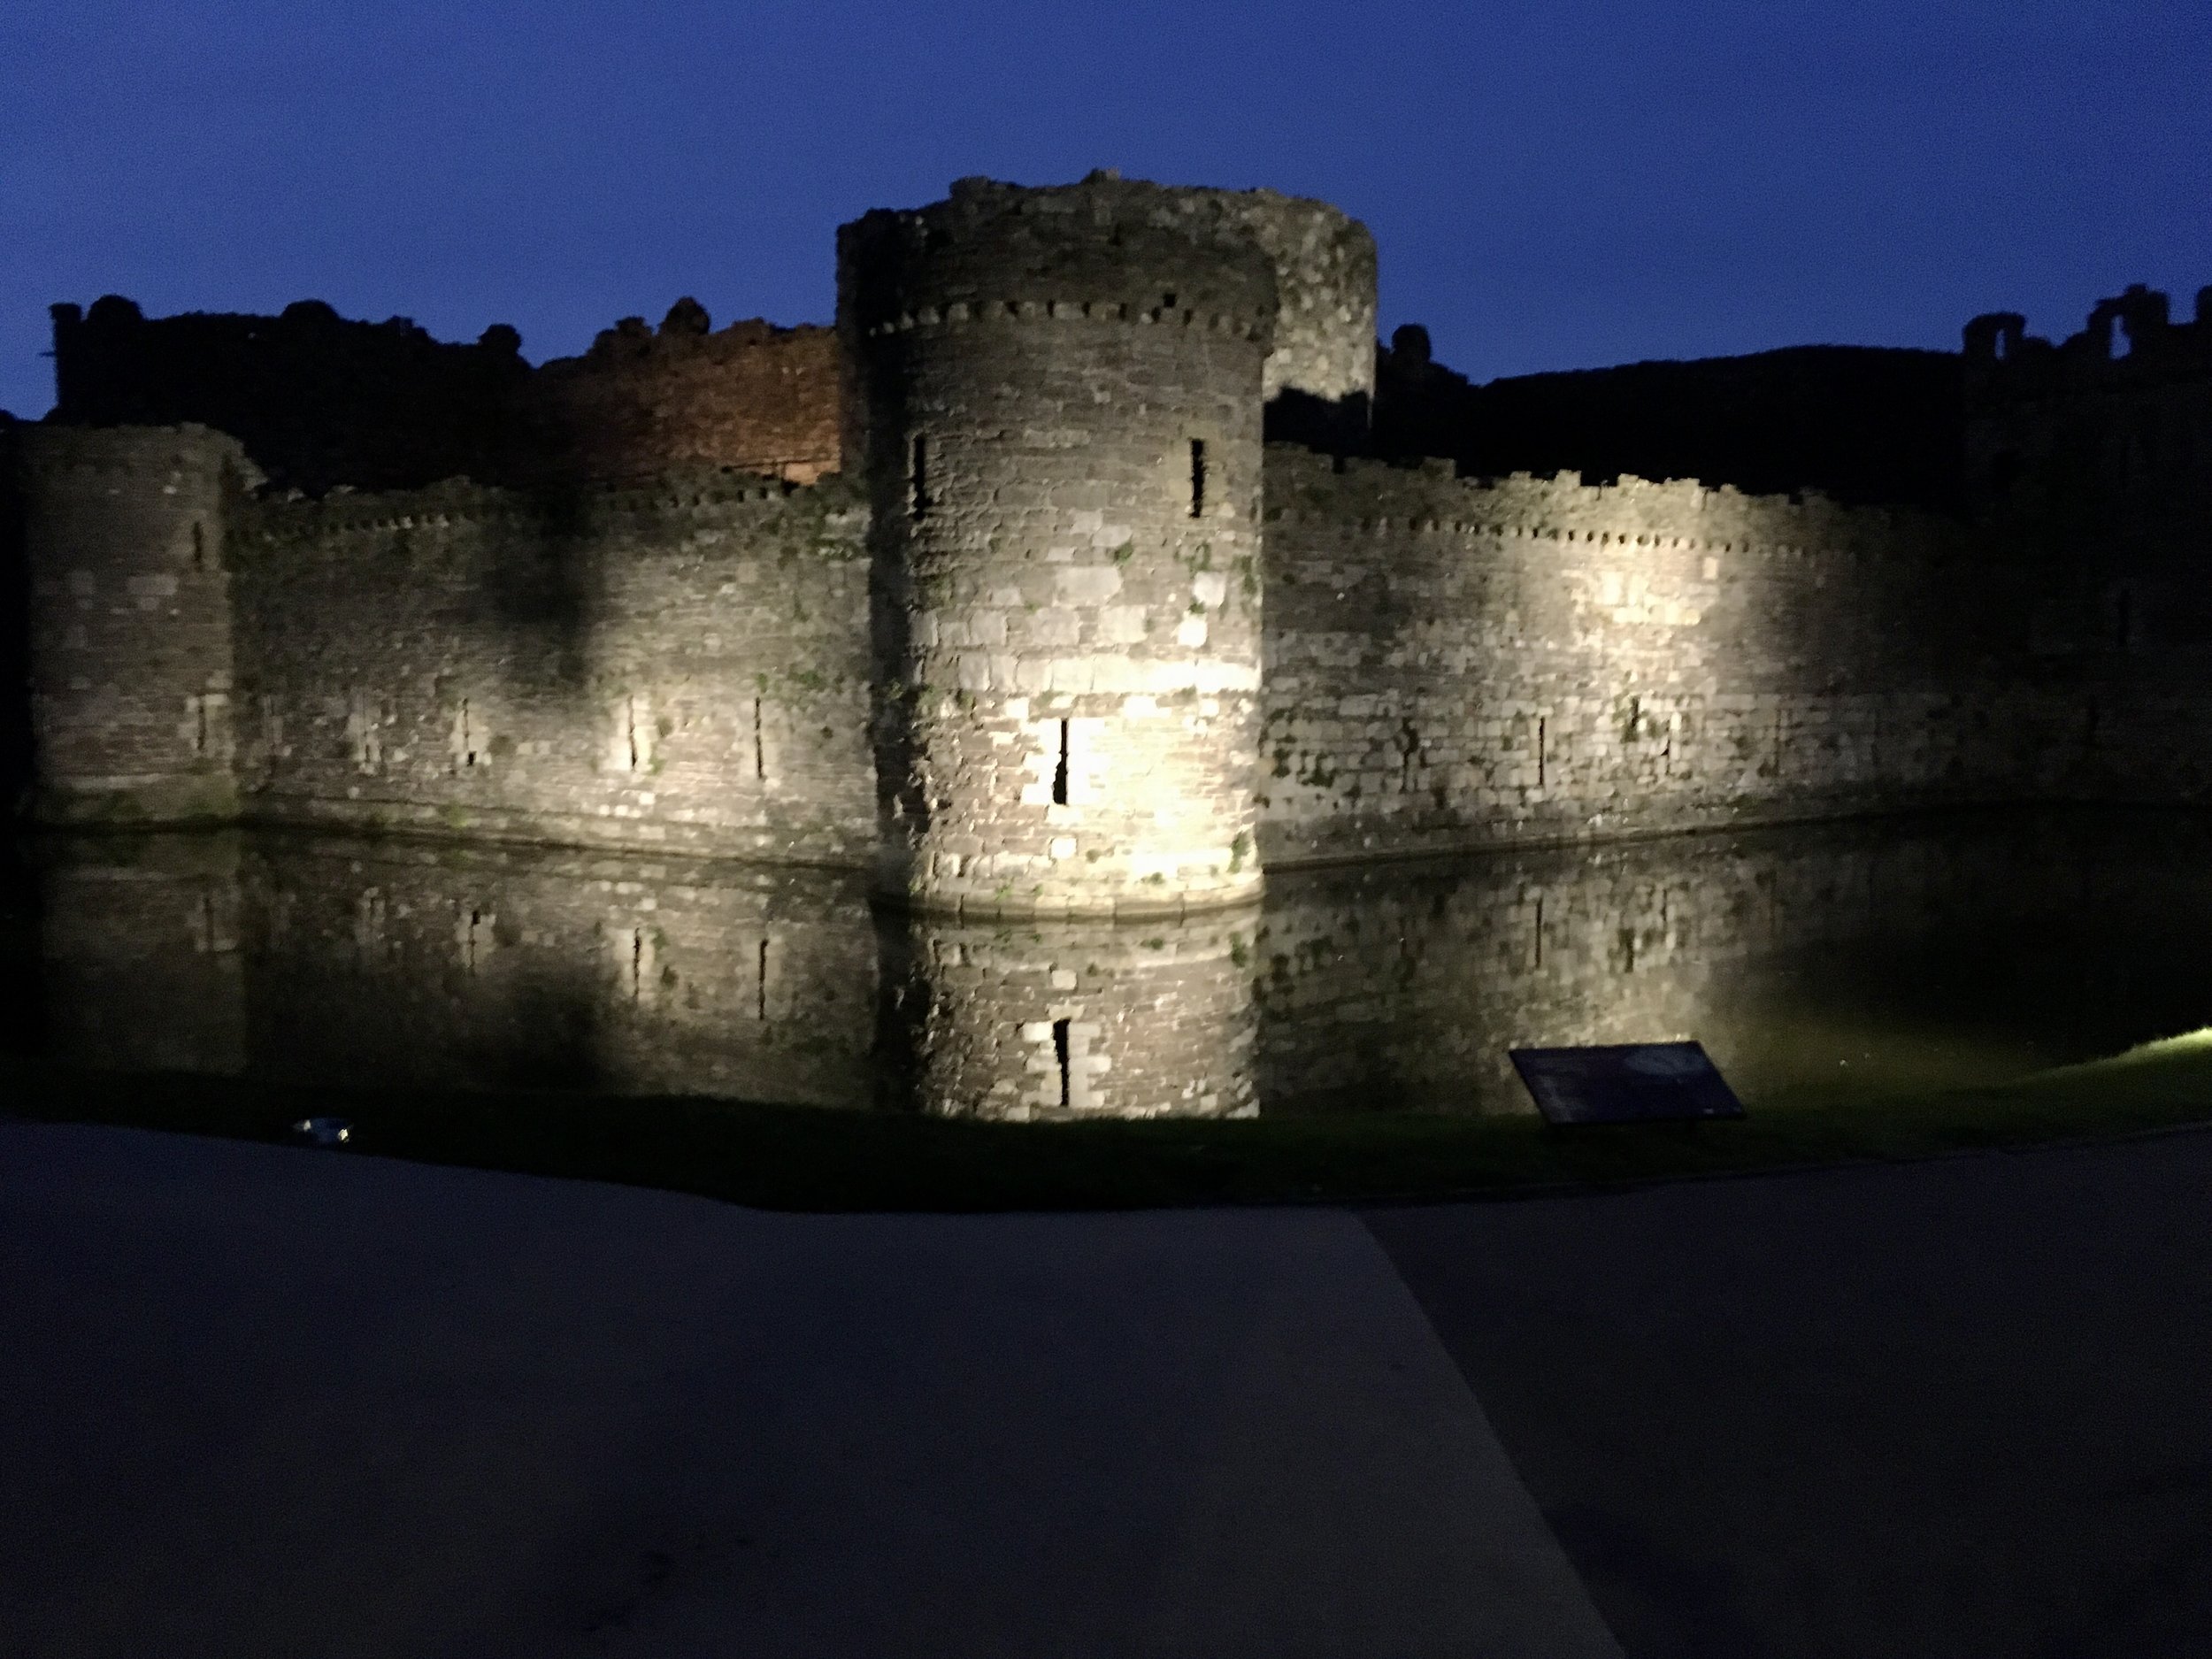  Night time at Beaumaris Castle, Anglesey. 